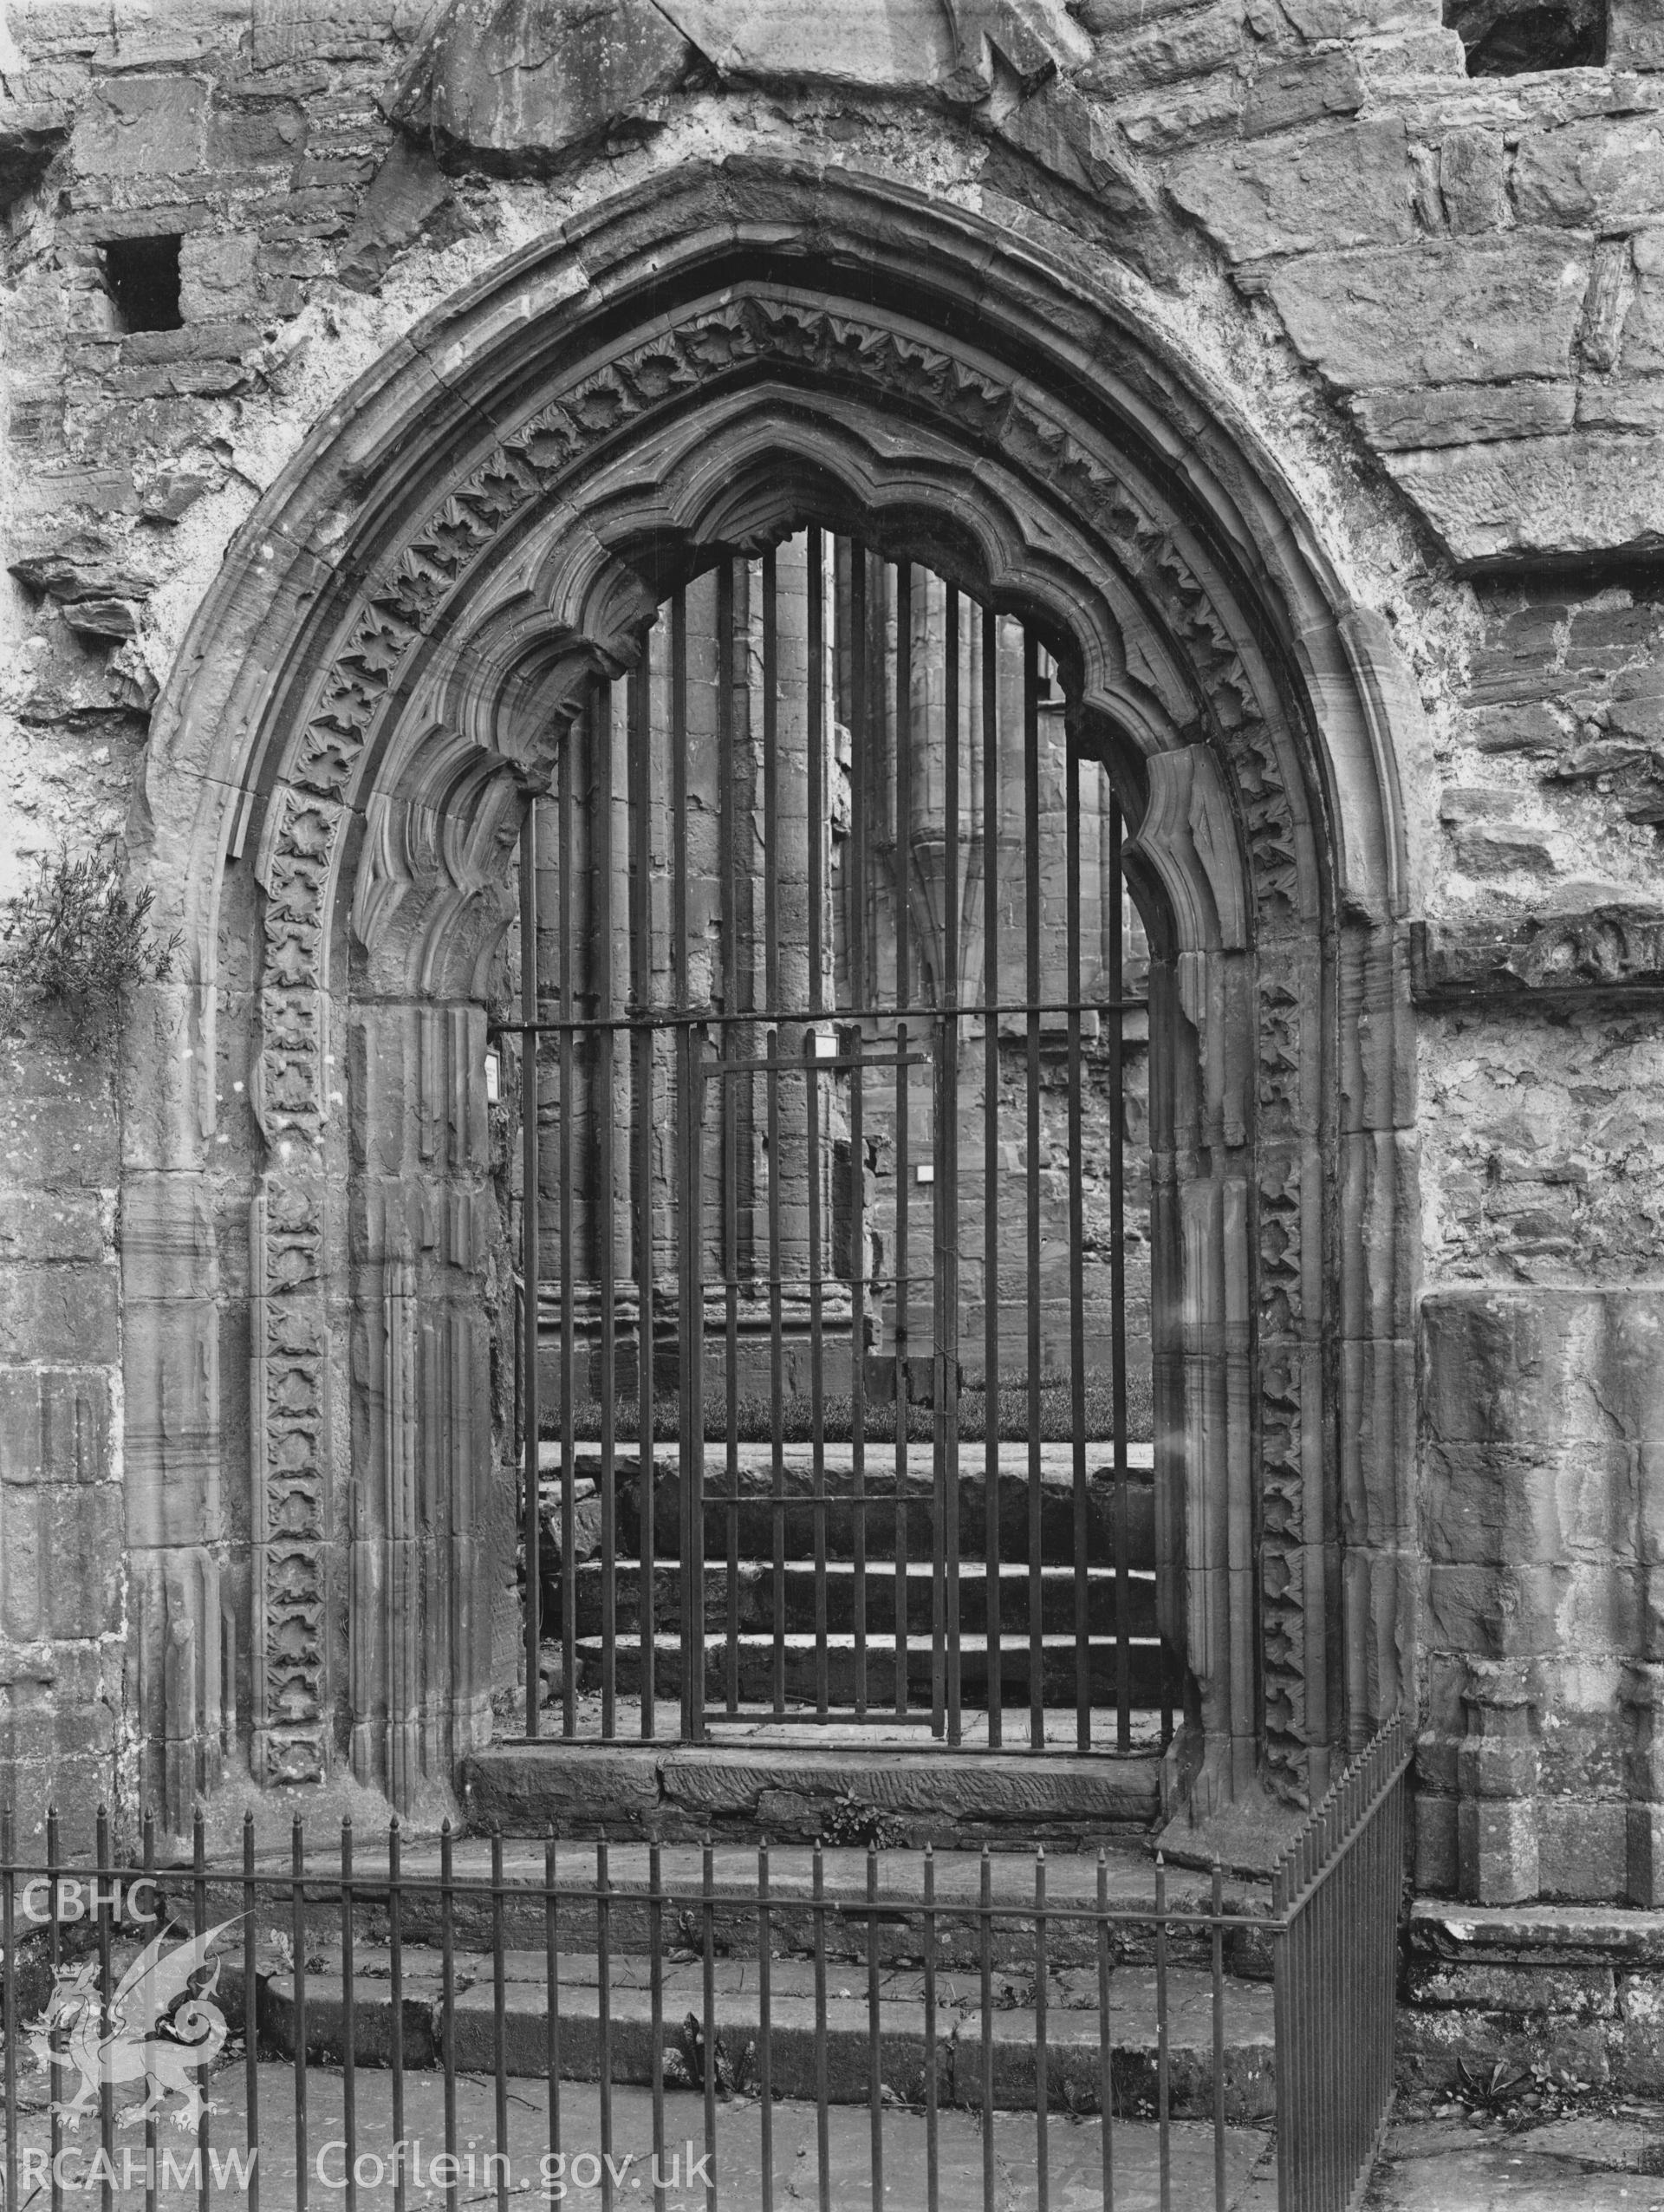 Digital copy of an early National Buildings Record photograph showing doorway from the cloister to the choir at Tintern Abbey.